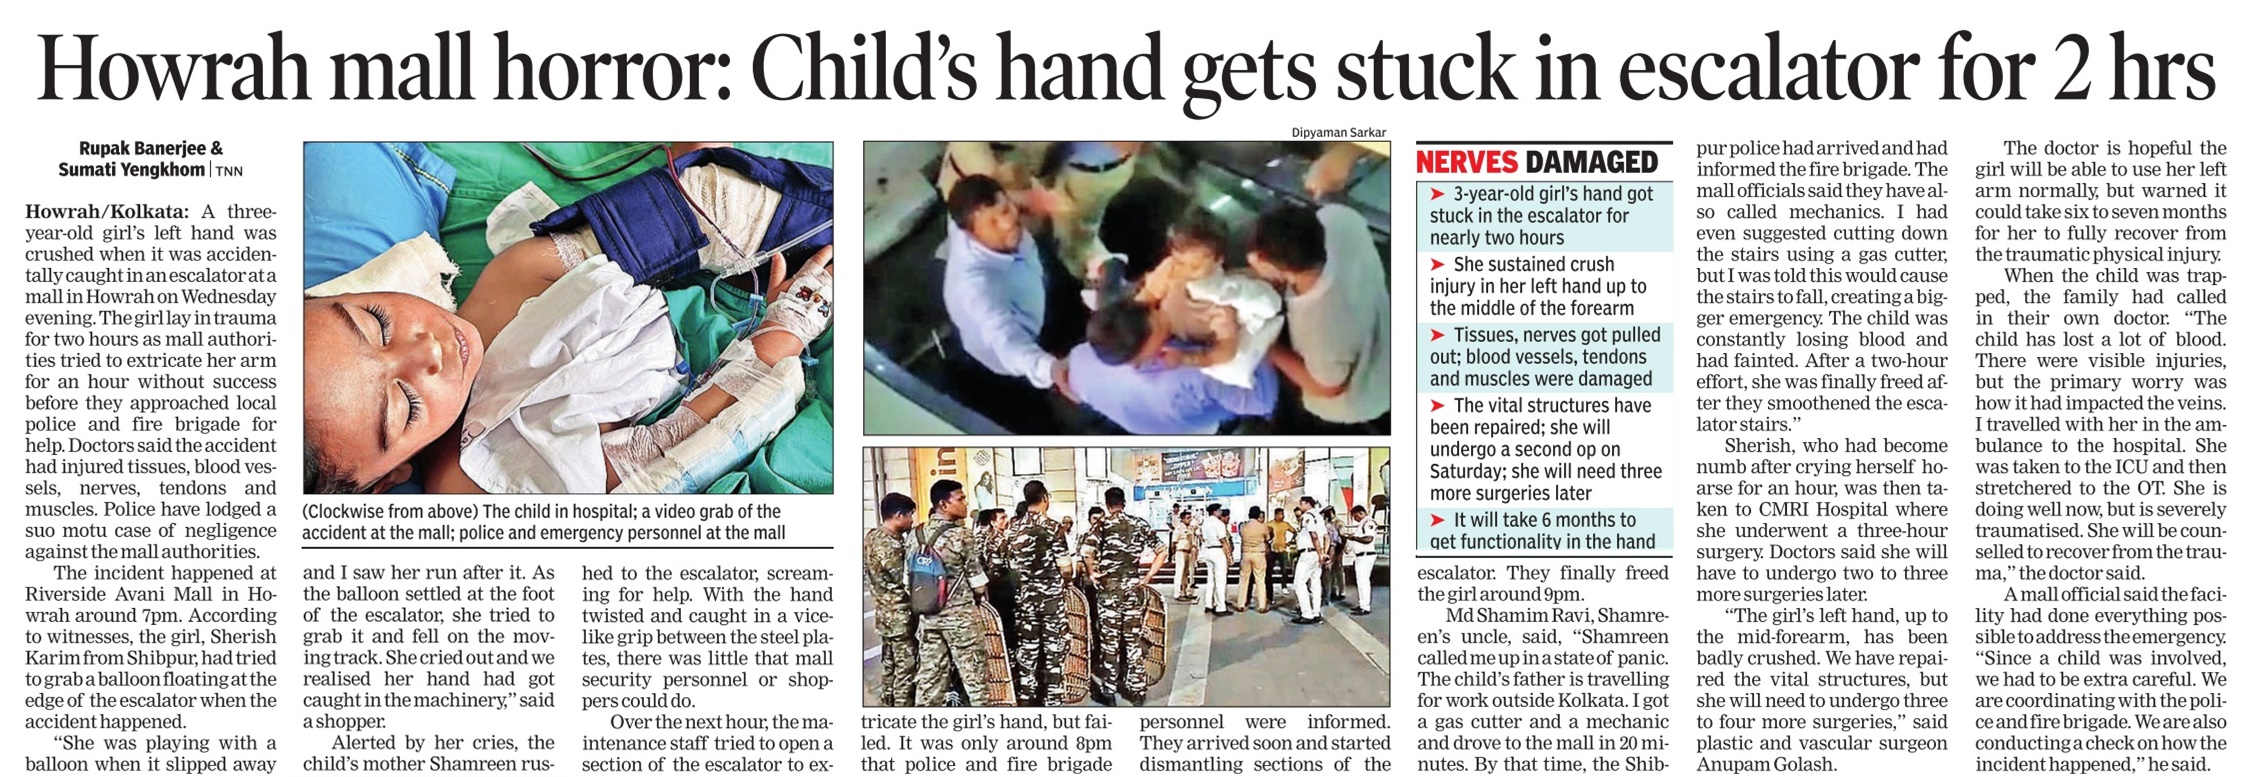 Howrah mall horror: Child’s hand gets stuck in escalator for 2 hrs